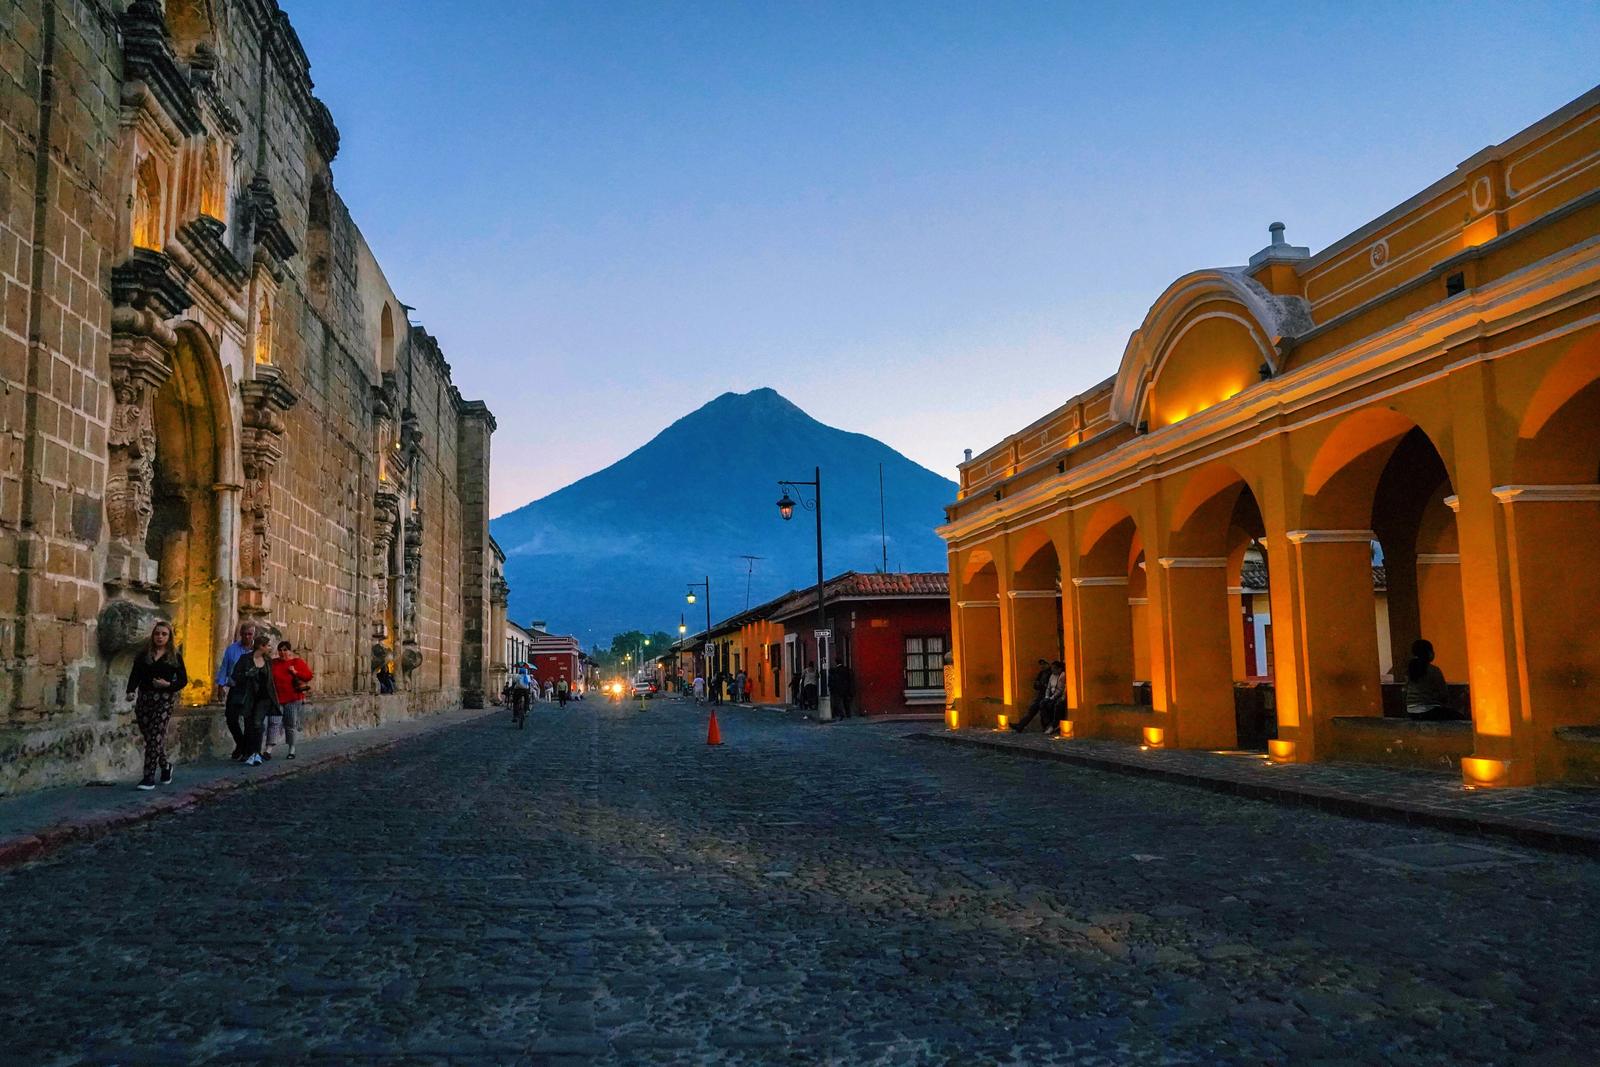 Can You Match These Extraordinary Natural Features to Their Respective Countries? Guatemala